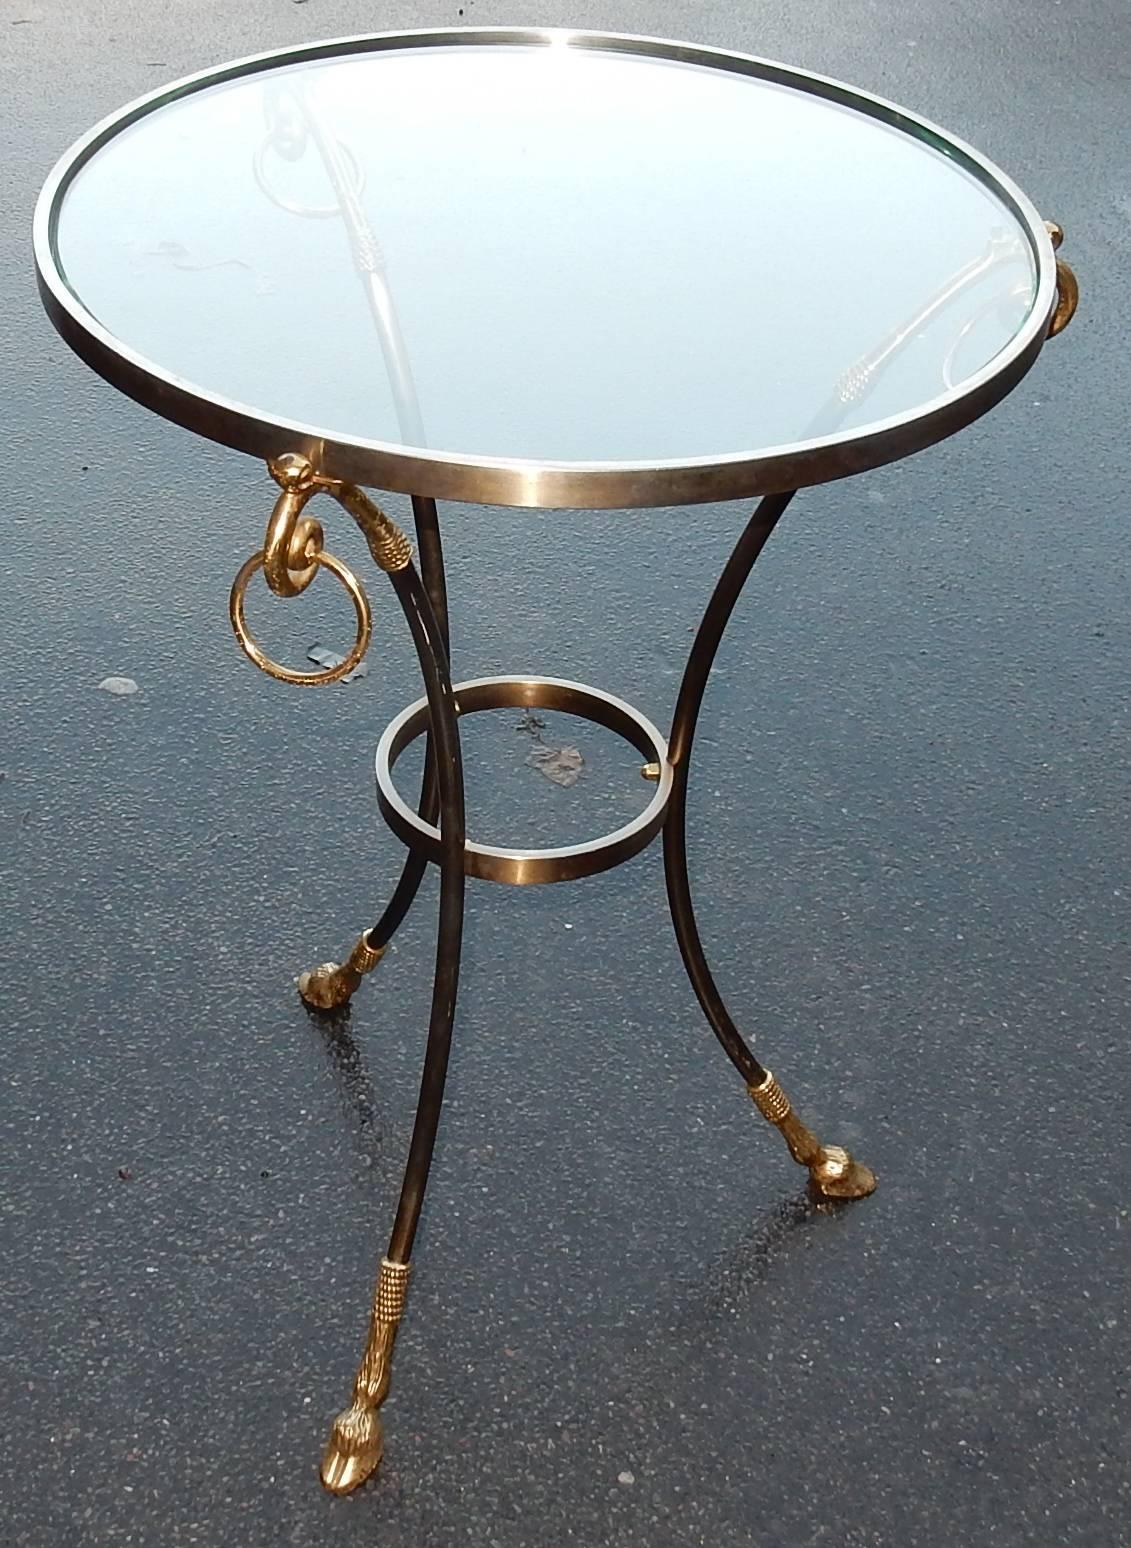 Bronze tripod pedestal table with buckles at the end of amounts,  spacer, feet ending by clans, trait in glass.
Everything is screwed, 
Central diameter top 52 cm 
Good condition, circa 1970/80